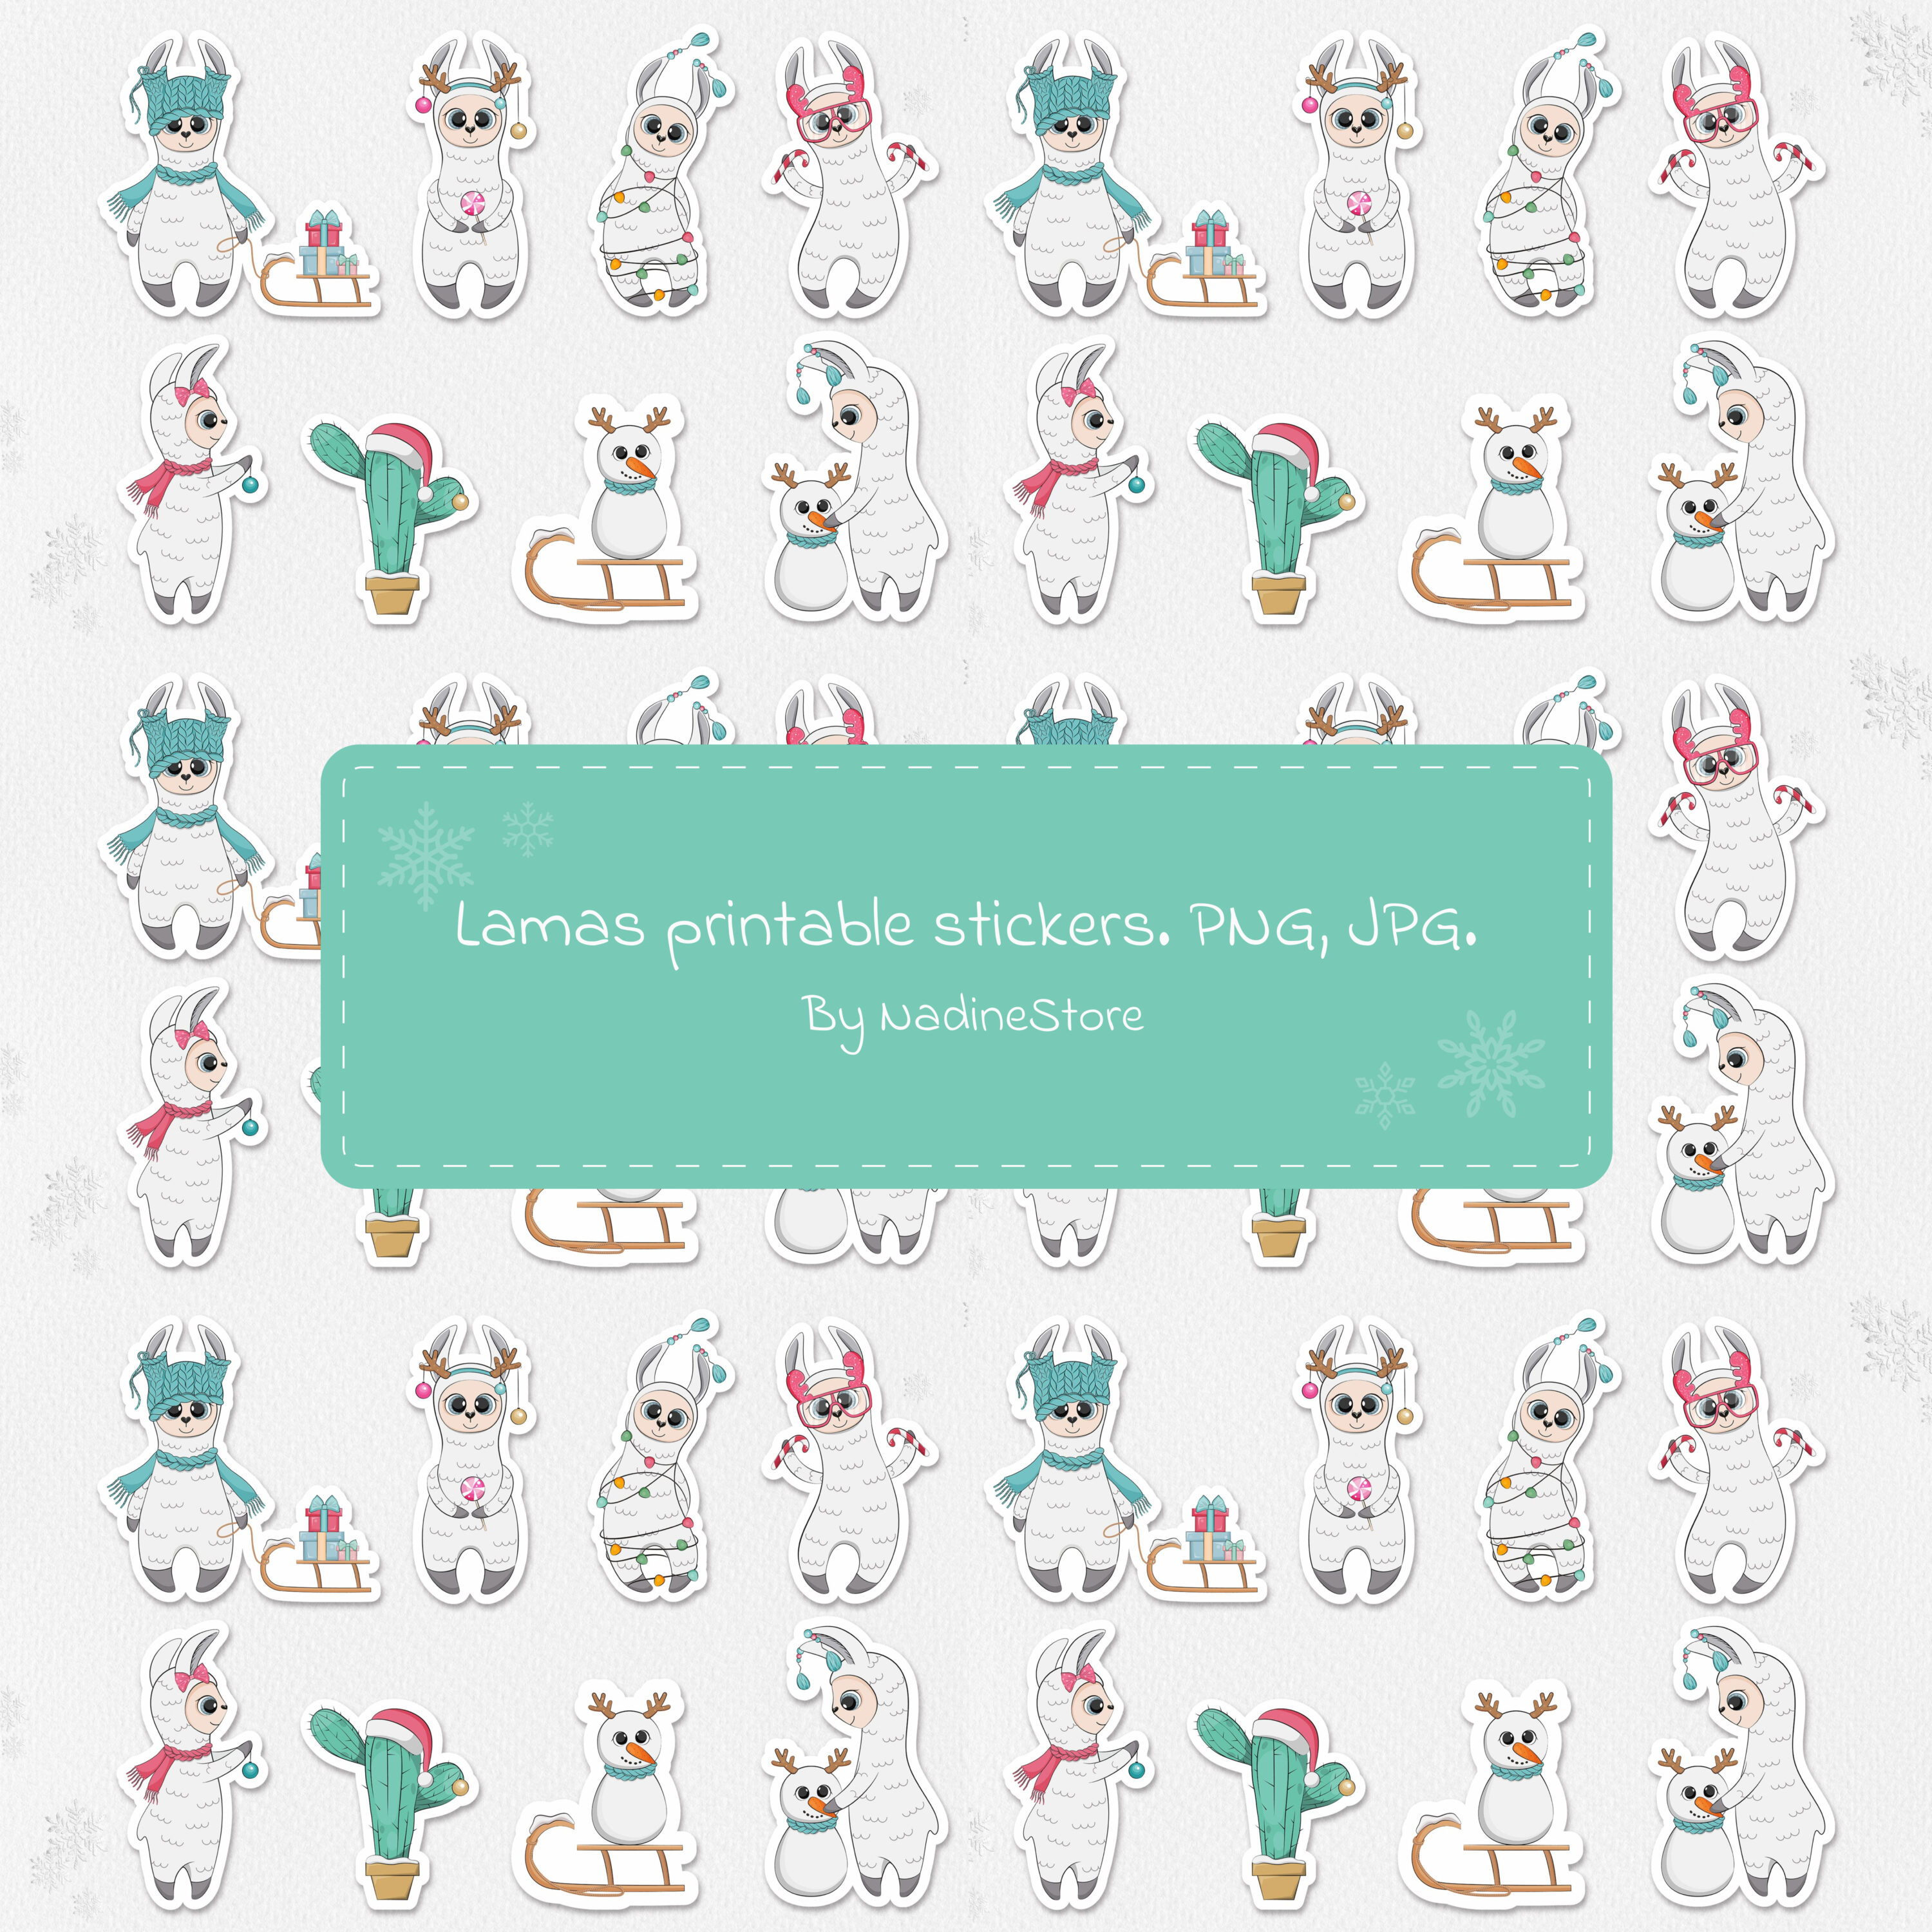 Lamas printable stickers preview.